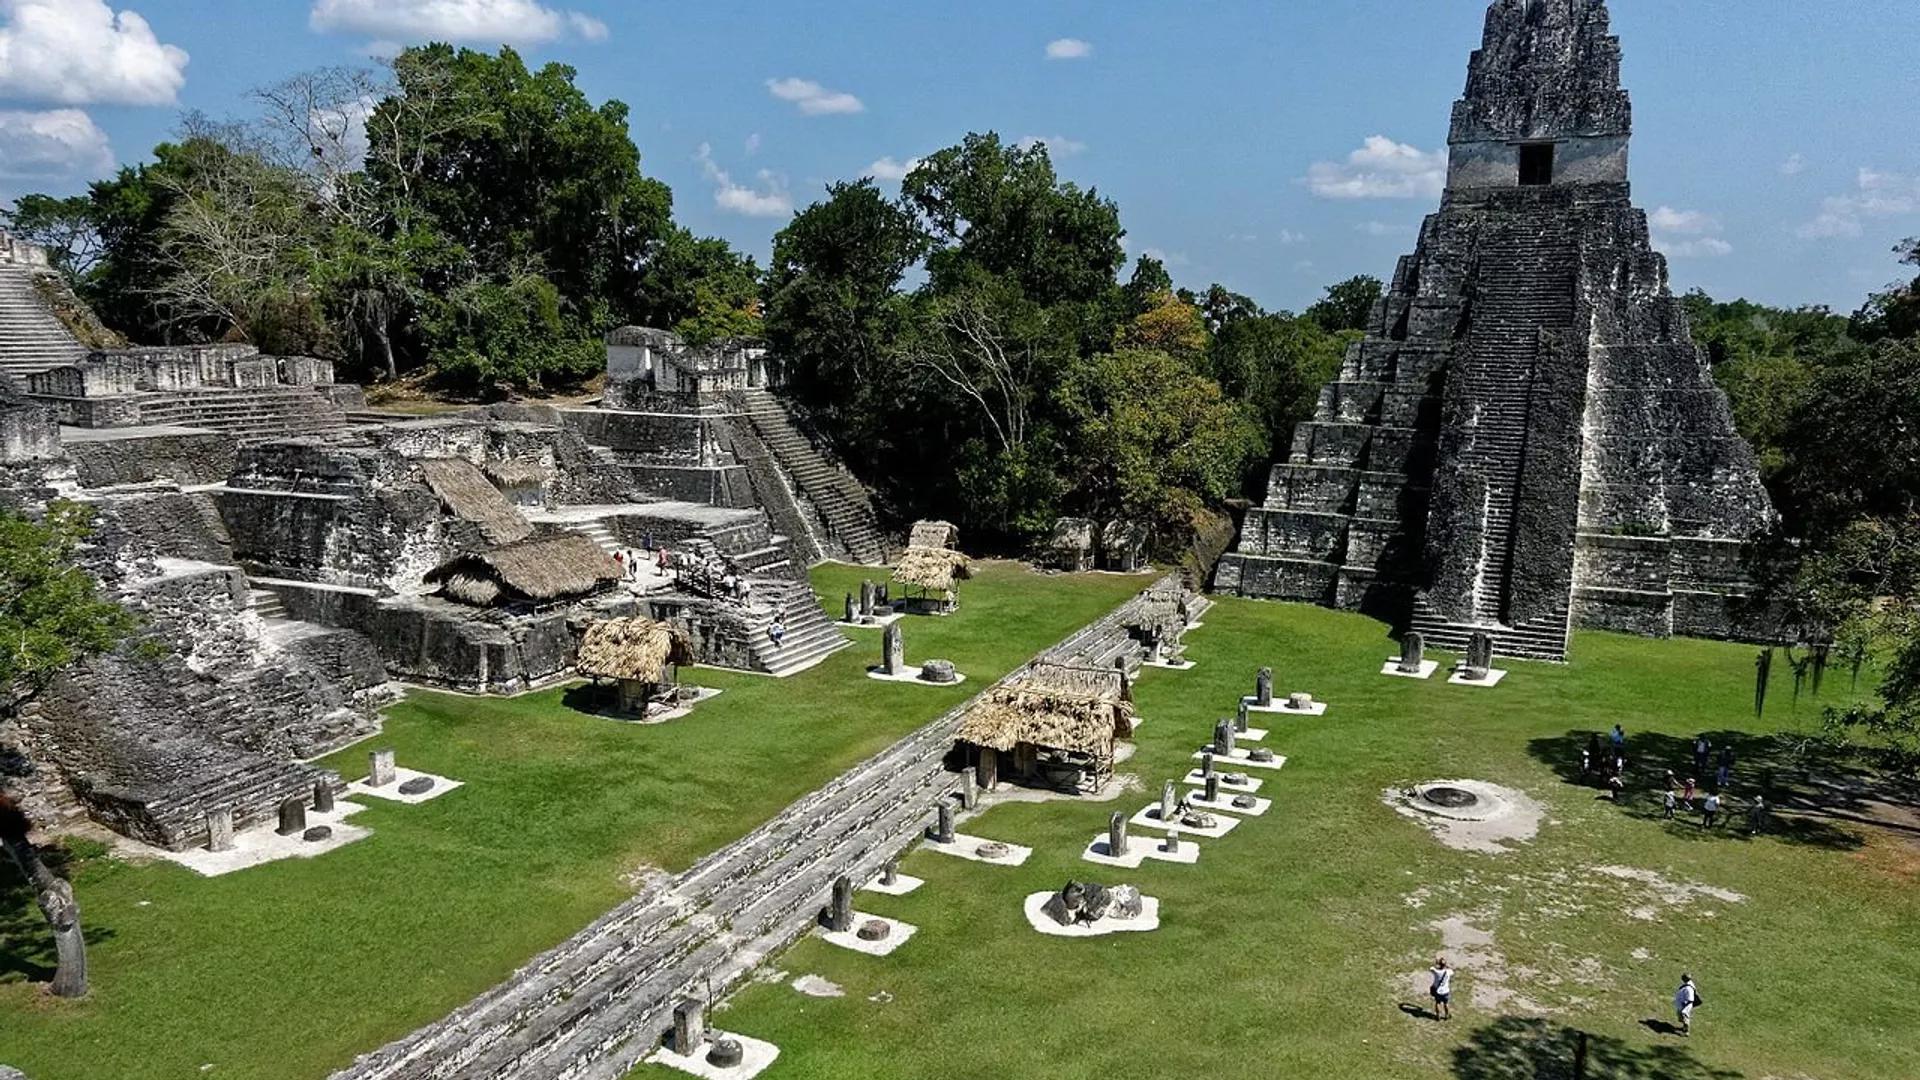 Mercury Pollution That Could Still Pose a Health Hazard Found at Ancient Mayan Ruins